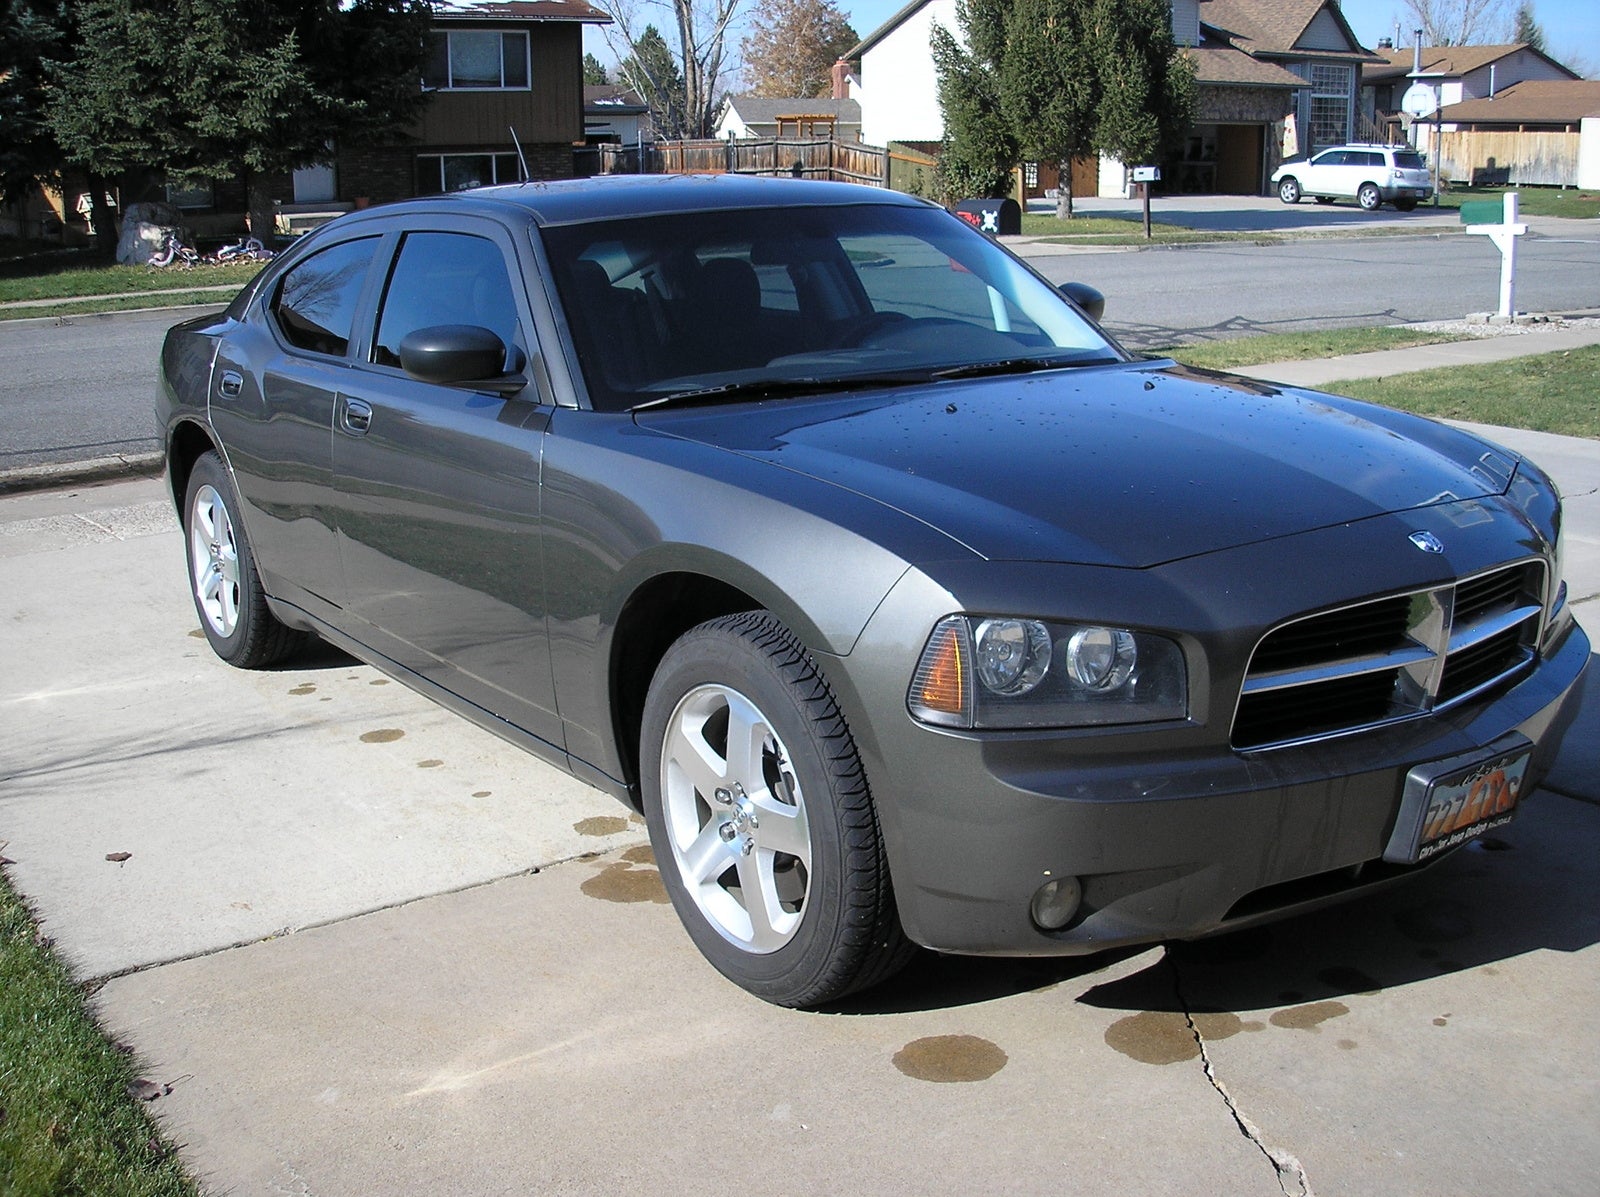 2008 Dodge Charger SXT AWD - Pictures - Picture of 2008 Dodge Charger ...